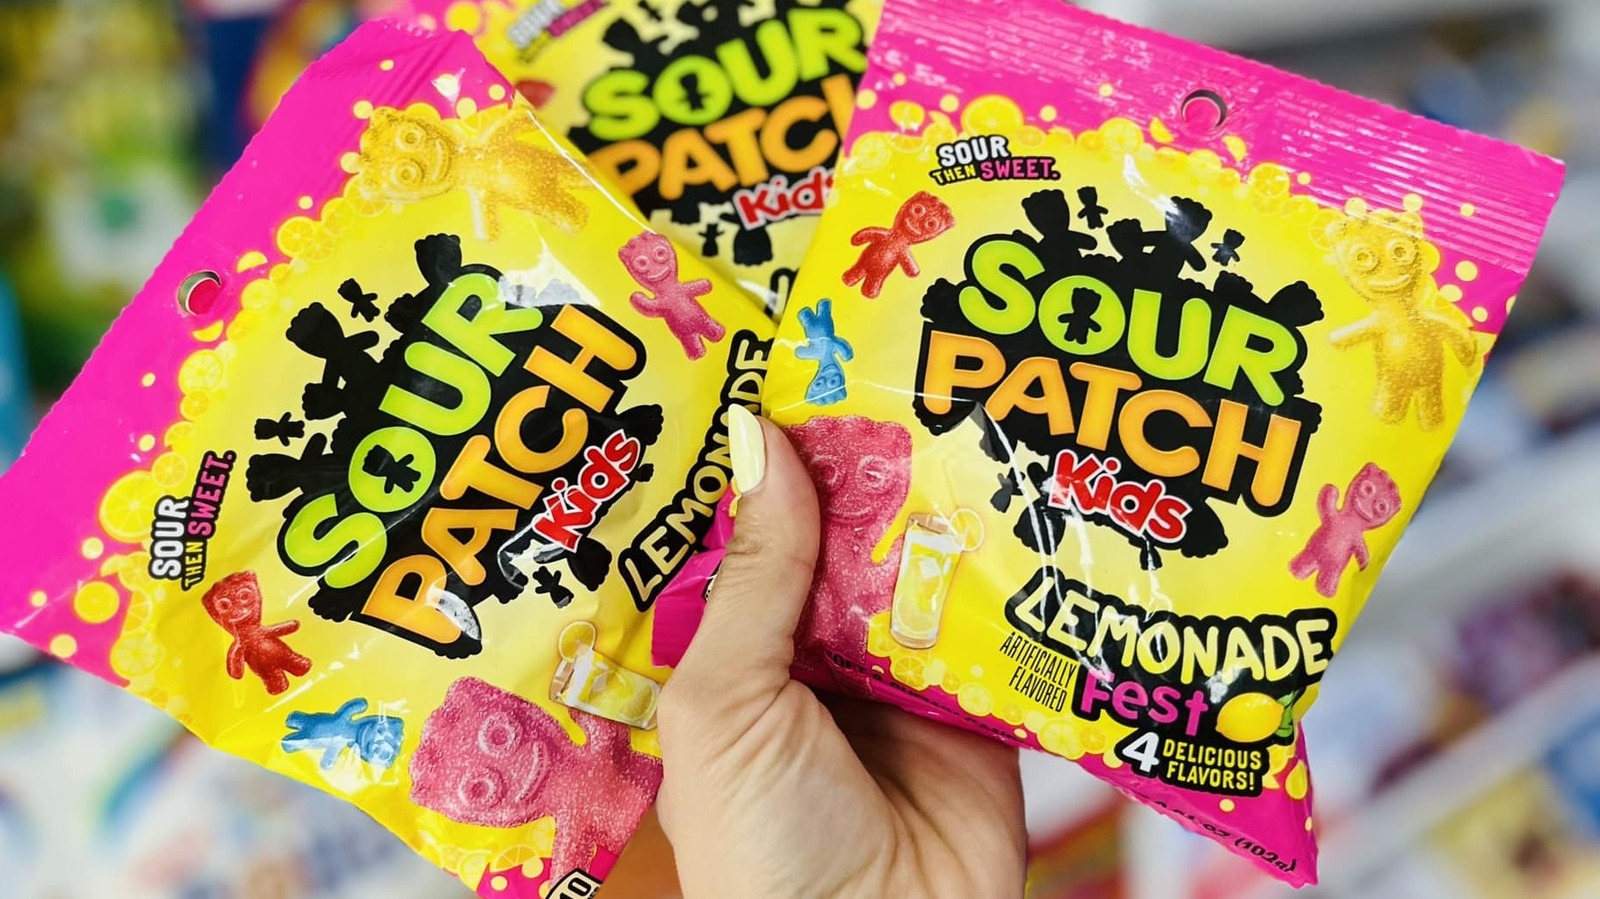 Sour Patch Kids Is Debuting Fruity New Lemonade Flavors – The Daily Meal